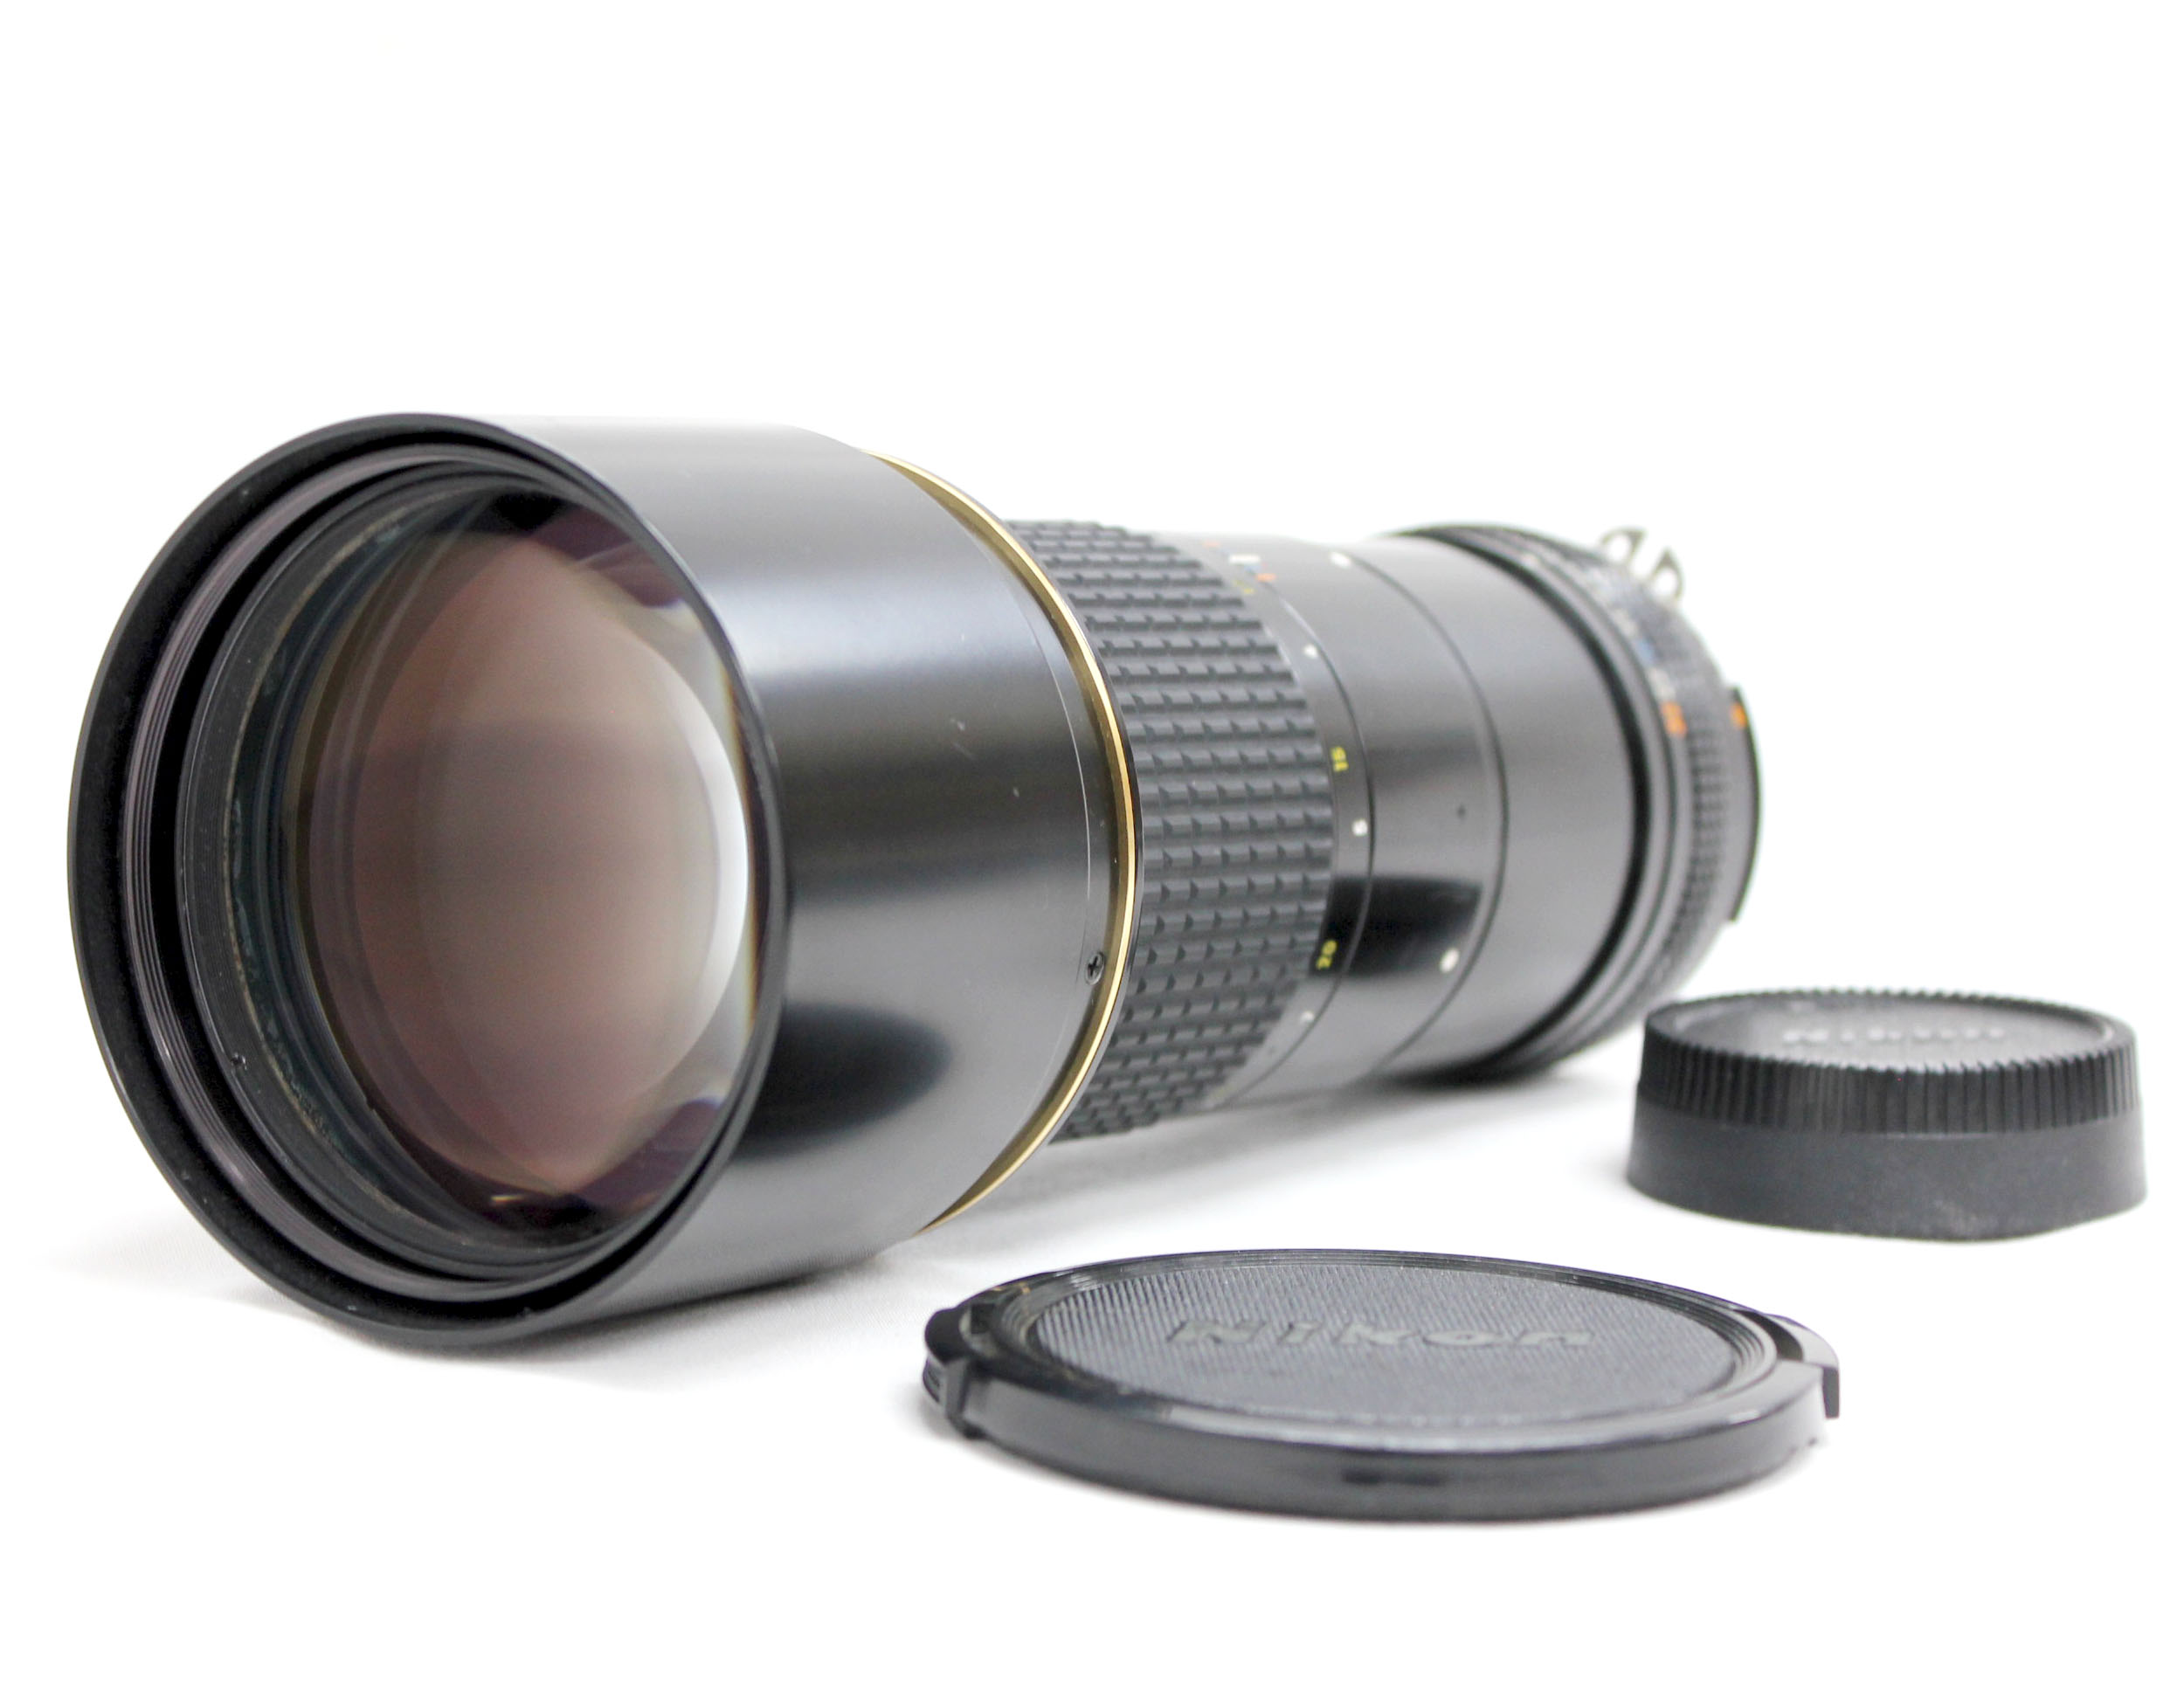 Japan Used Camera Shop | [Excellent+++++] Nikon Ai-s ais Nikkor ED IF 300mm F/4.5 MF Telephoto Lens F Mount from Japan